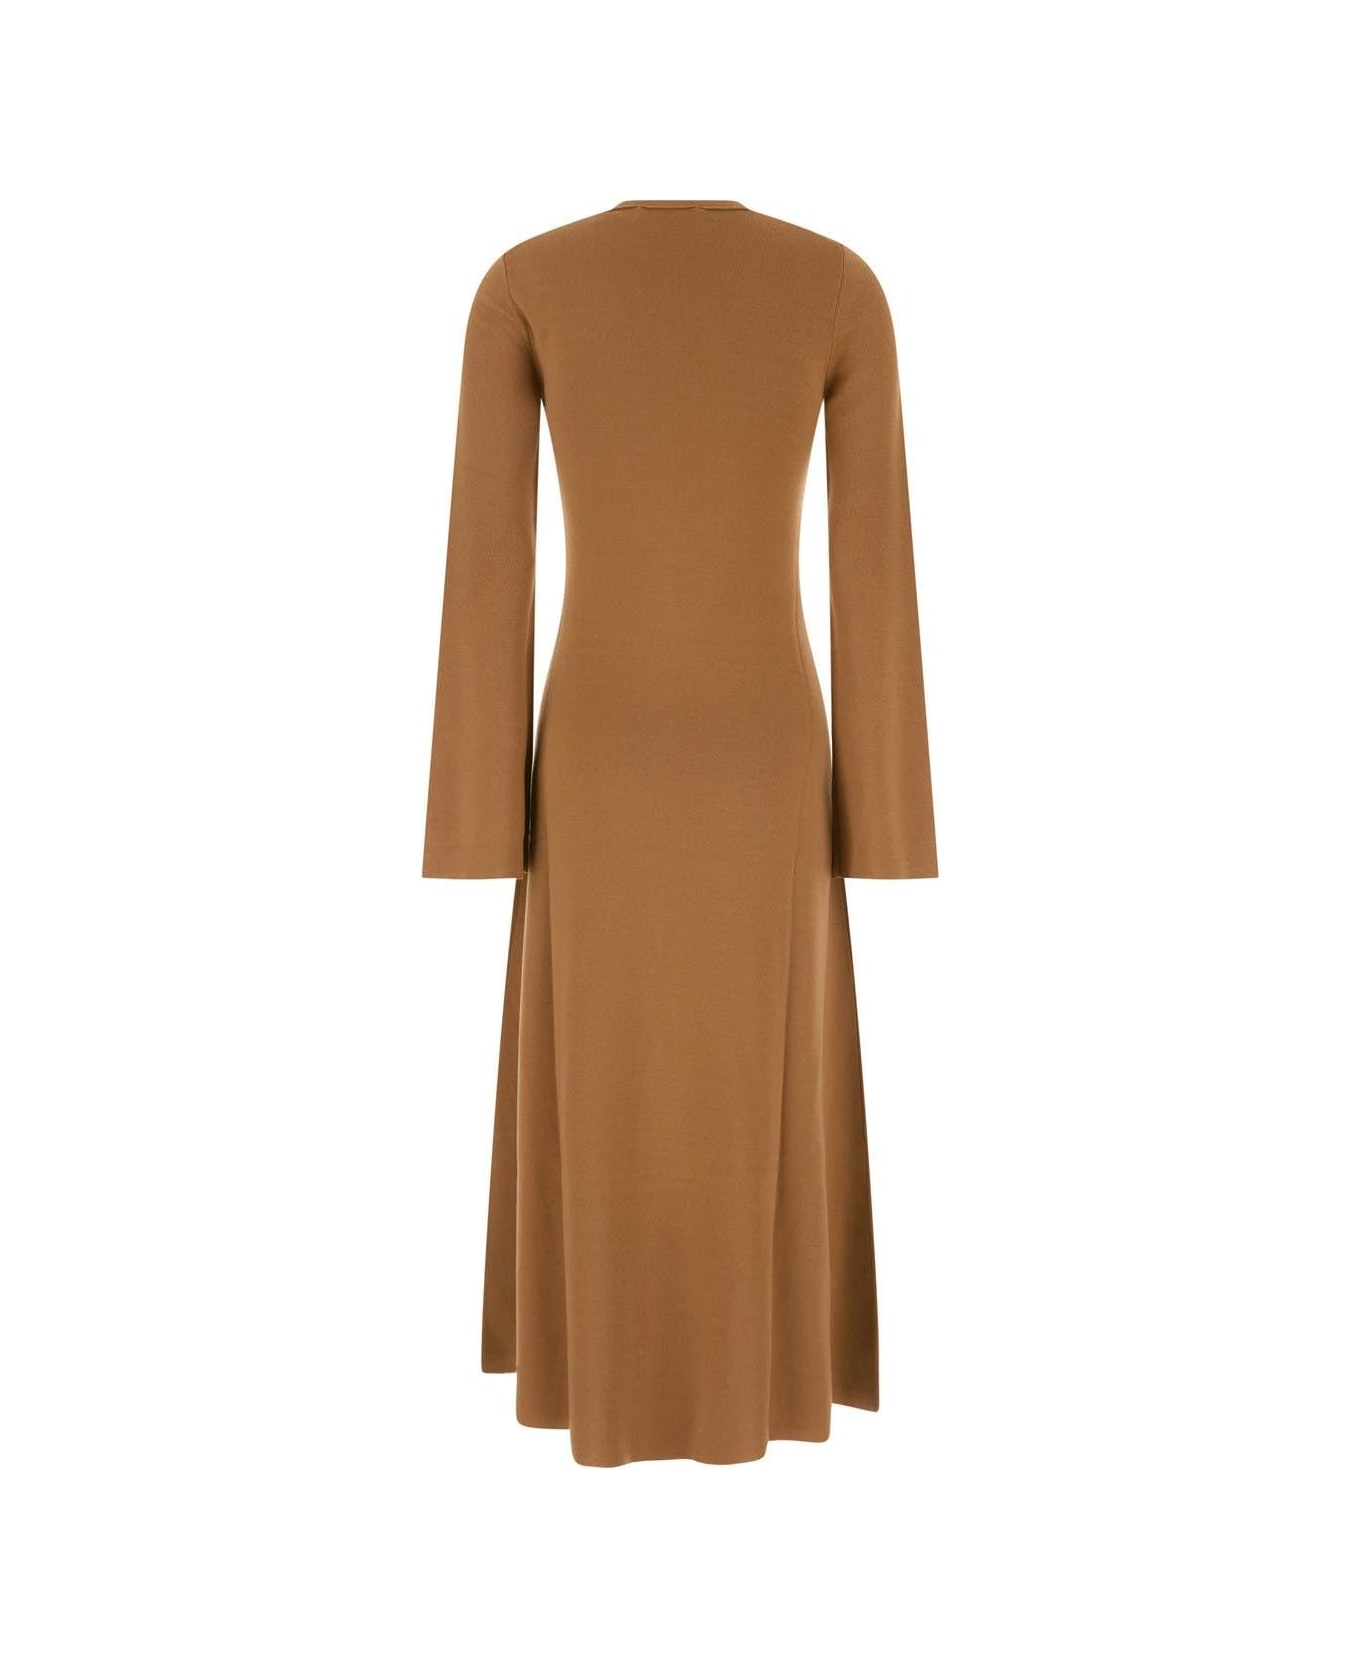 Chloé Dress With Buttons - Beige